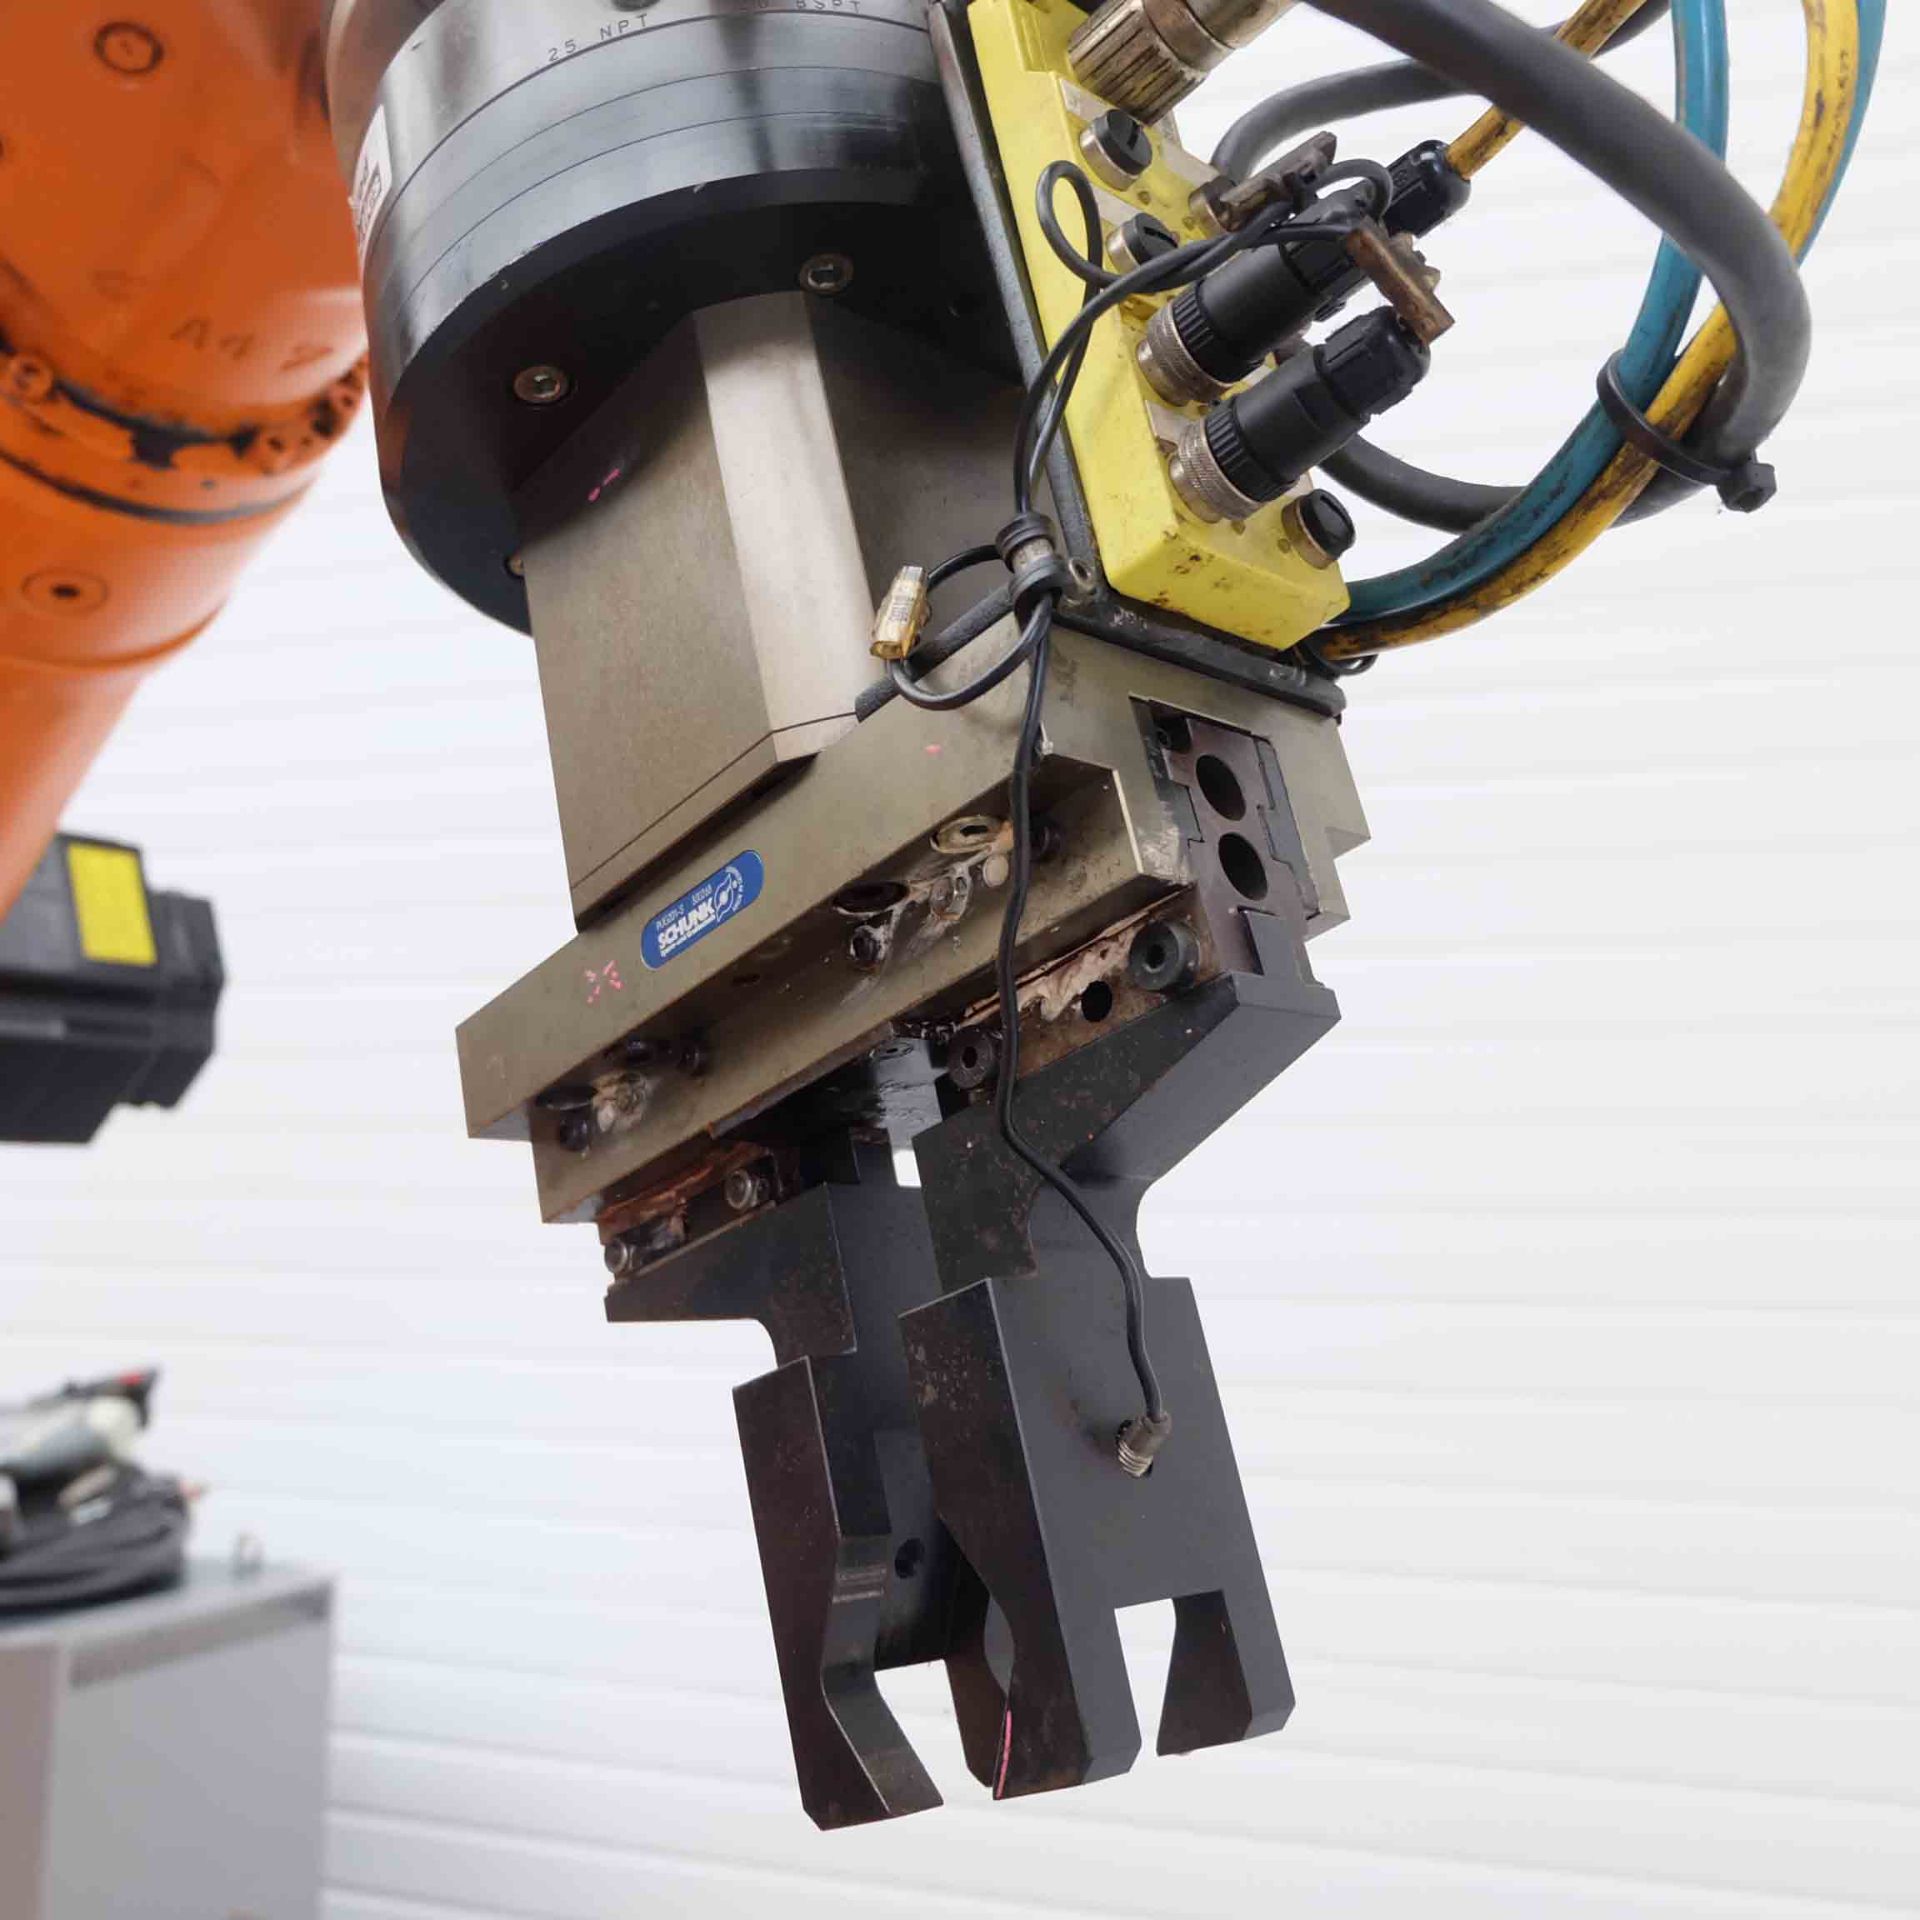 2 x Kuka Type KR125 6 Axis Robotic Arms. (1 Complete & 1 Incomplete). - Image 32 of 35